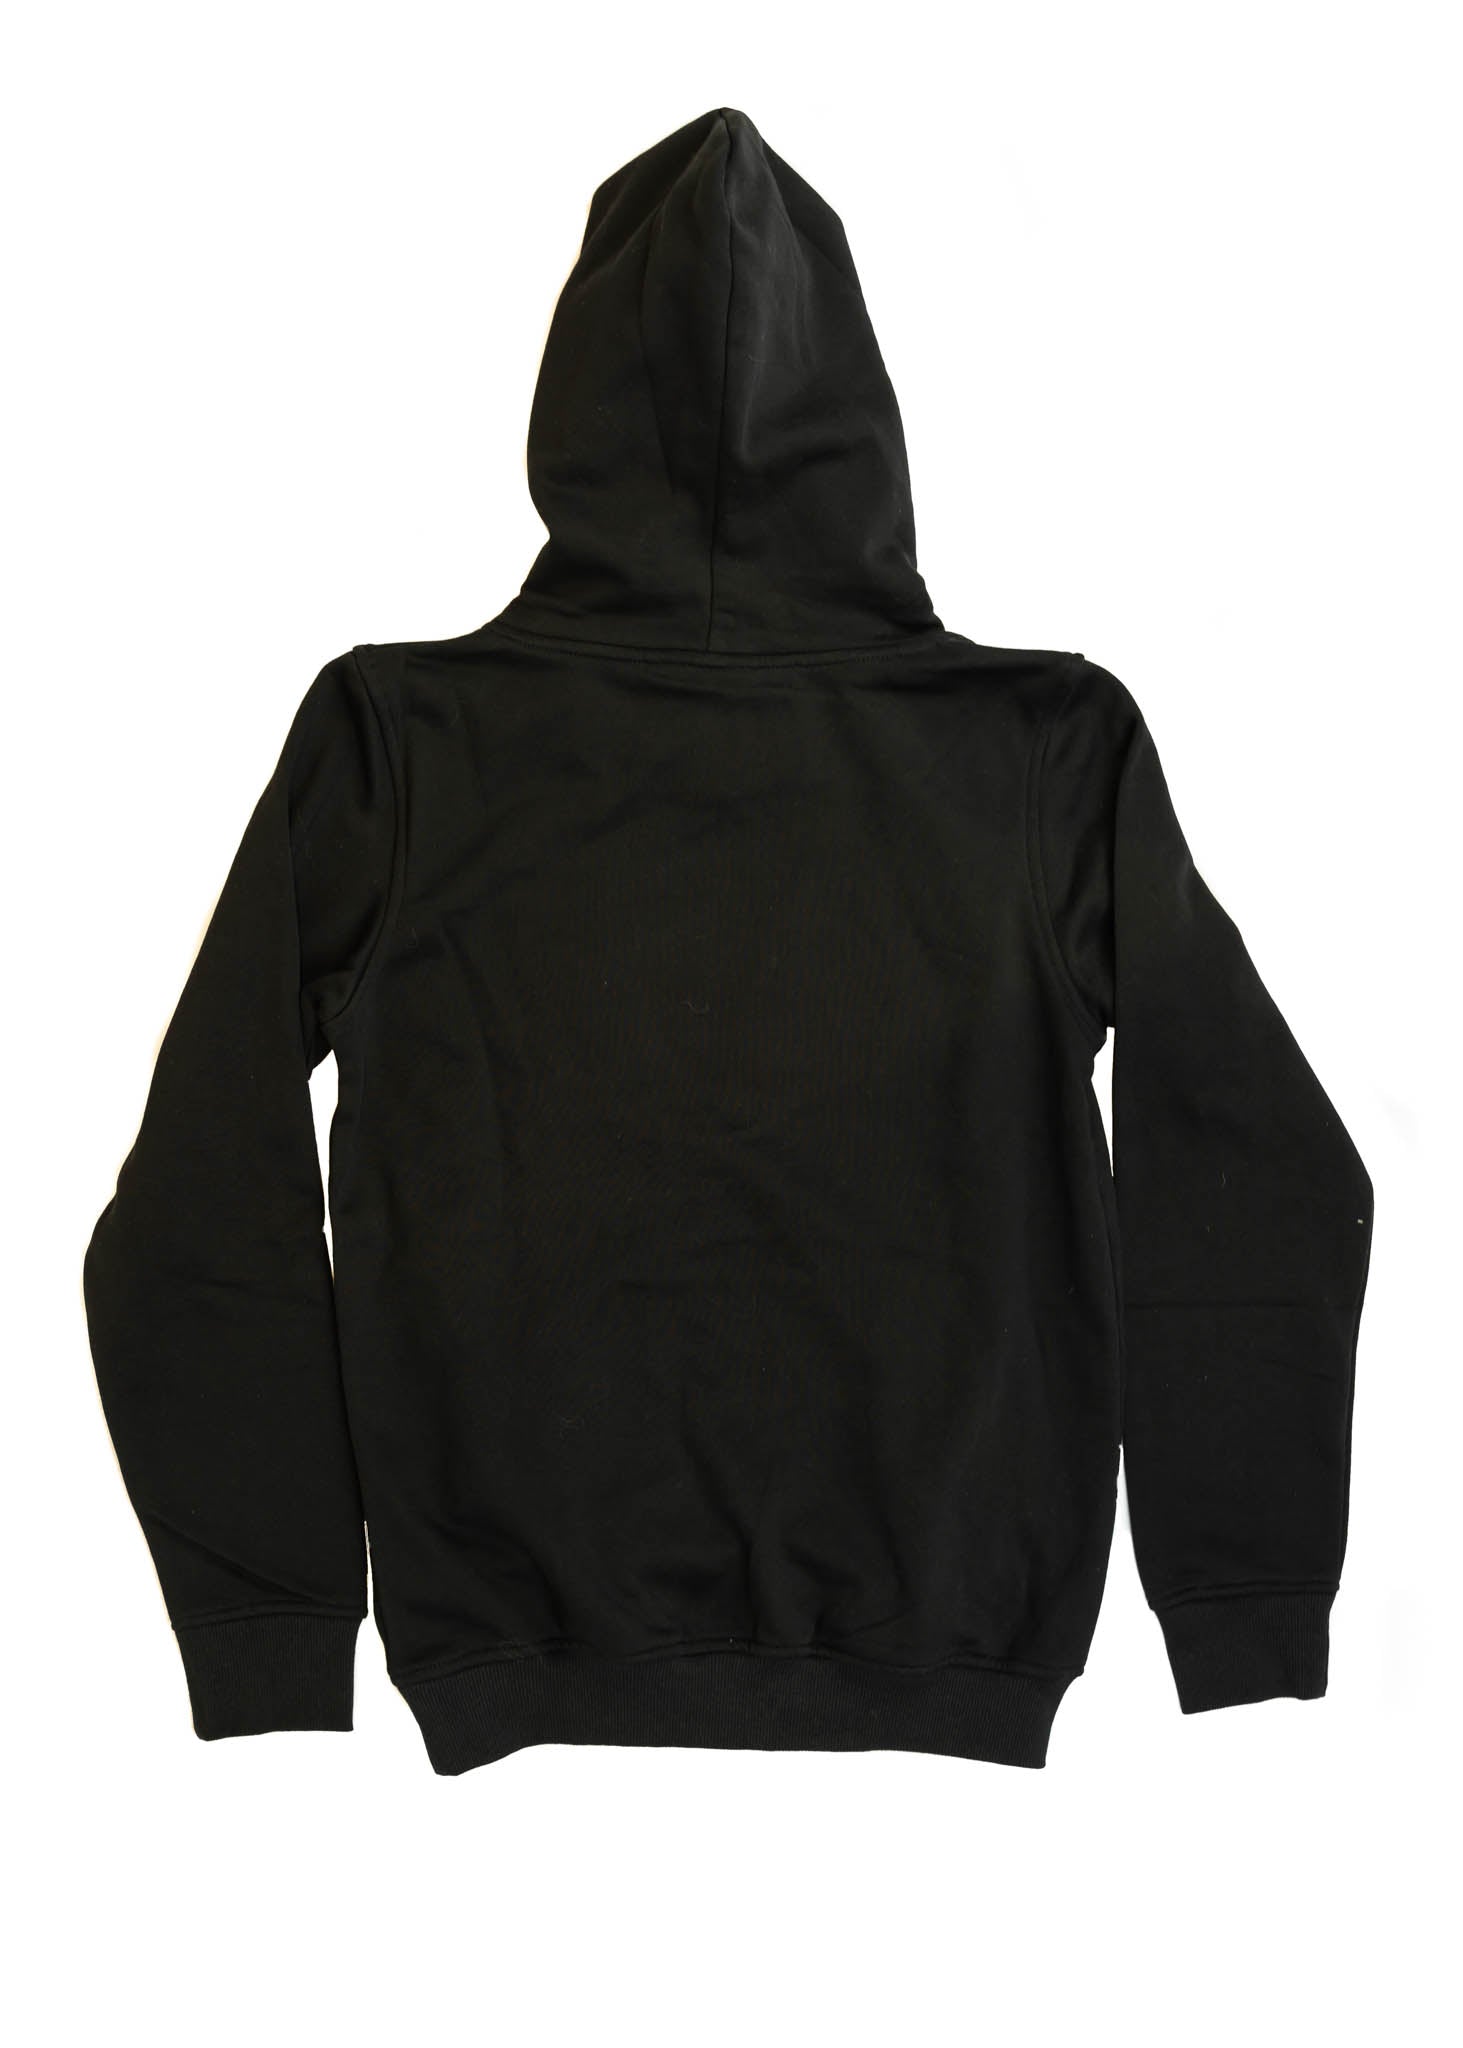 A black unisex hoodie for men and women. Full size view of the back side of a black sweater with a red embroidered F40. Fabric composition is cotton, polyester, and rayon. The material is very soft, stretchy, and non-transparent. The style of this hoodie is long sleeve, crewneck with a hood, hooded, with embroidery on the left chest.